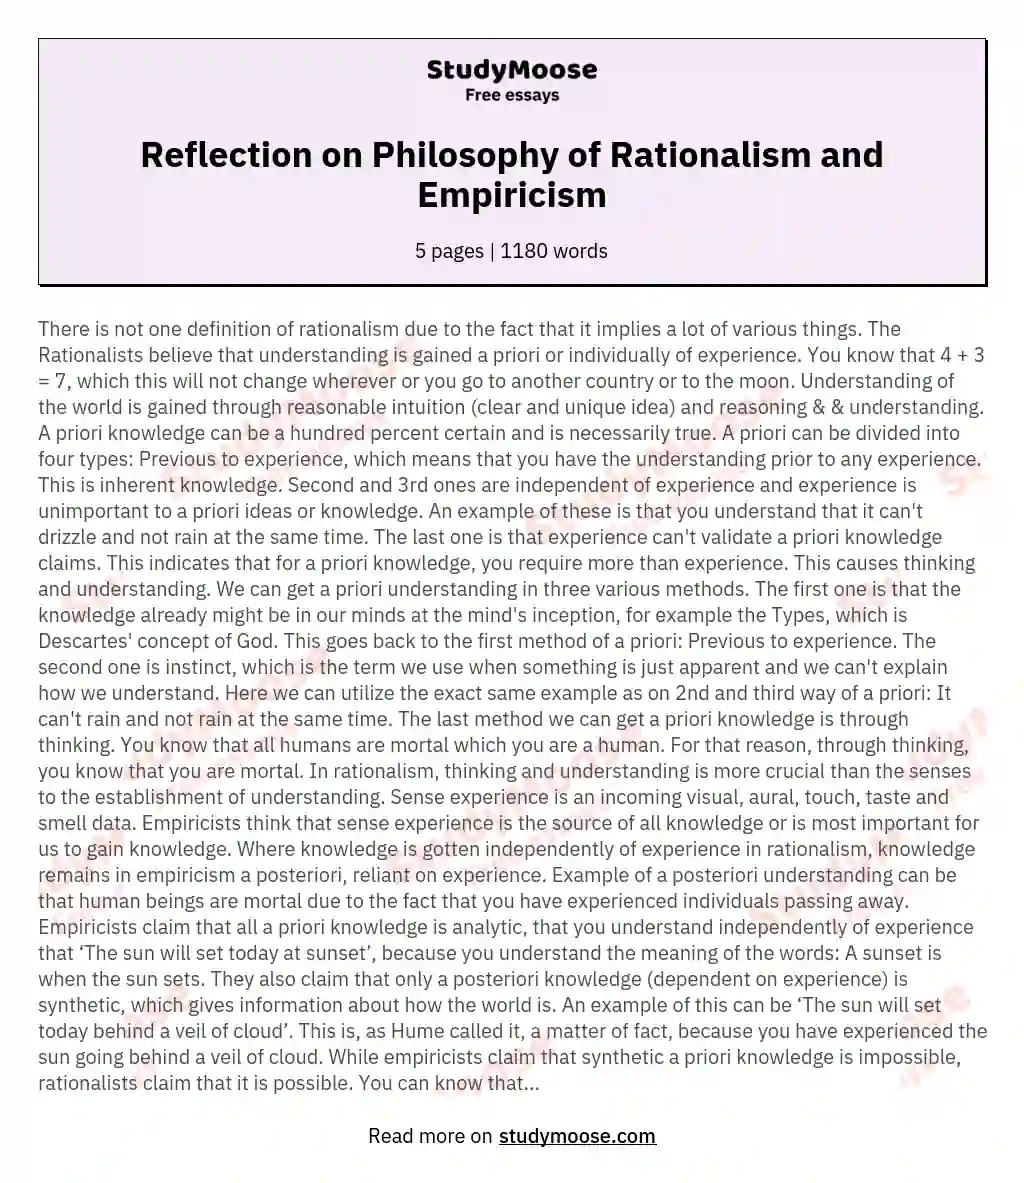 Reflection on Philosophy of Rationalism and Empiricism essay